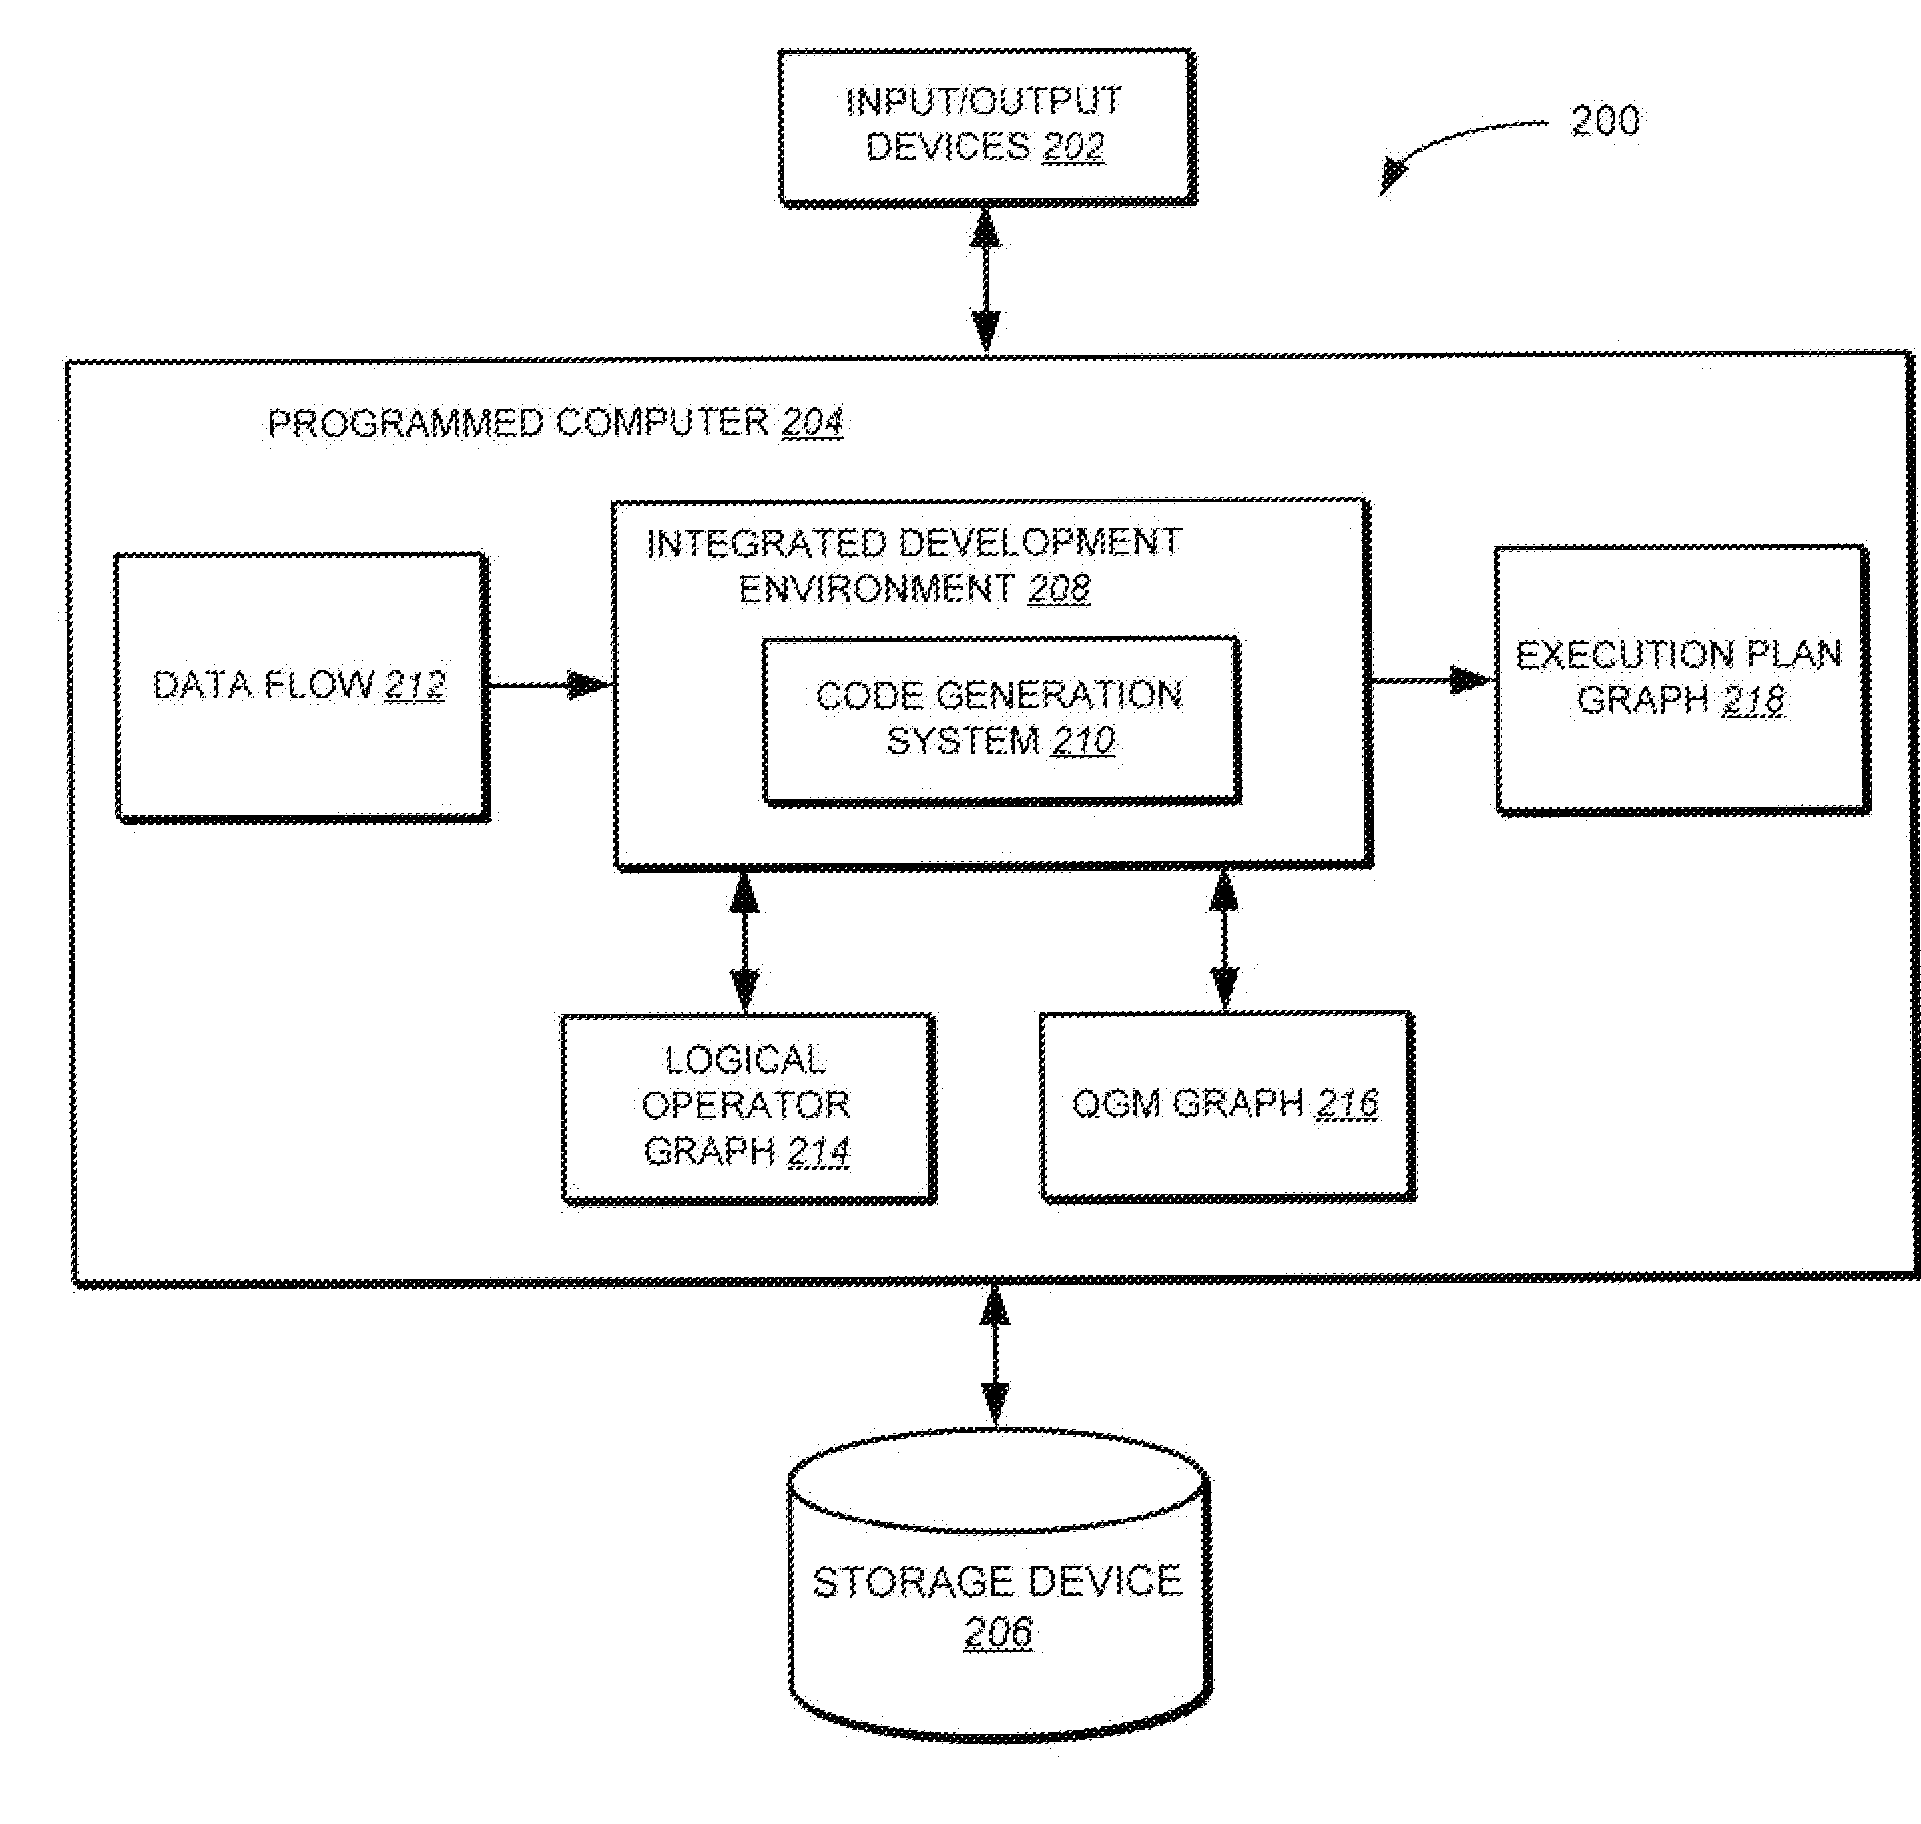 Method and apparatus for modelling data exchange in a data flow of an extract, transform, and load (ETL) process